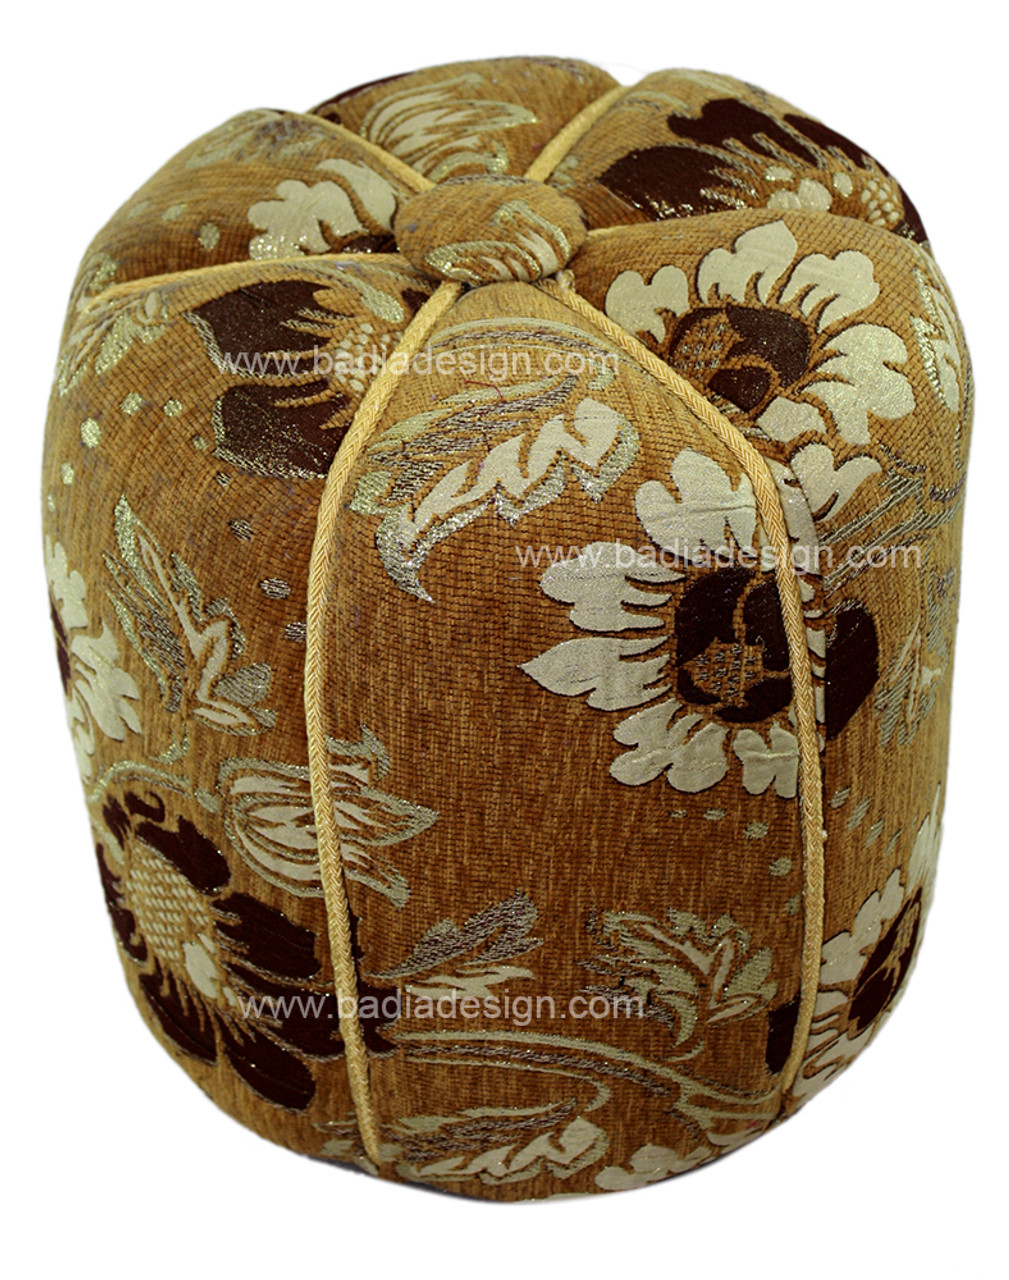 Brown and Beige Fabric Pouf - FP026